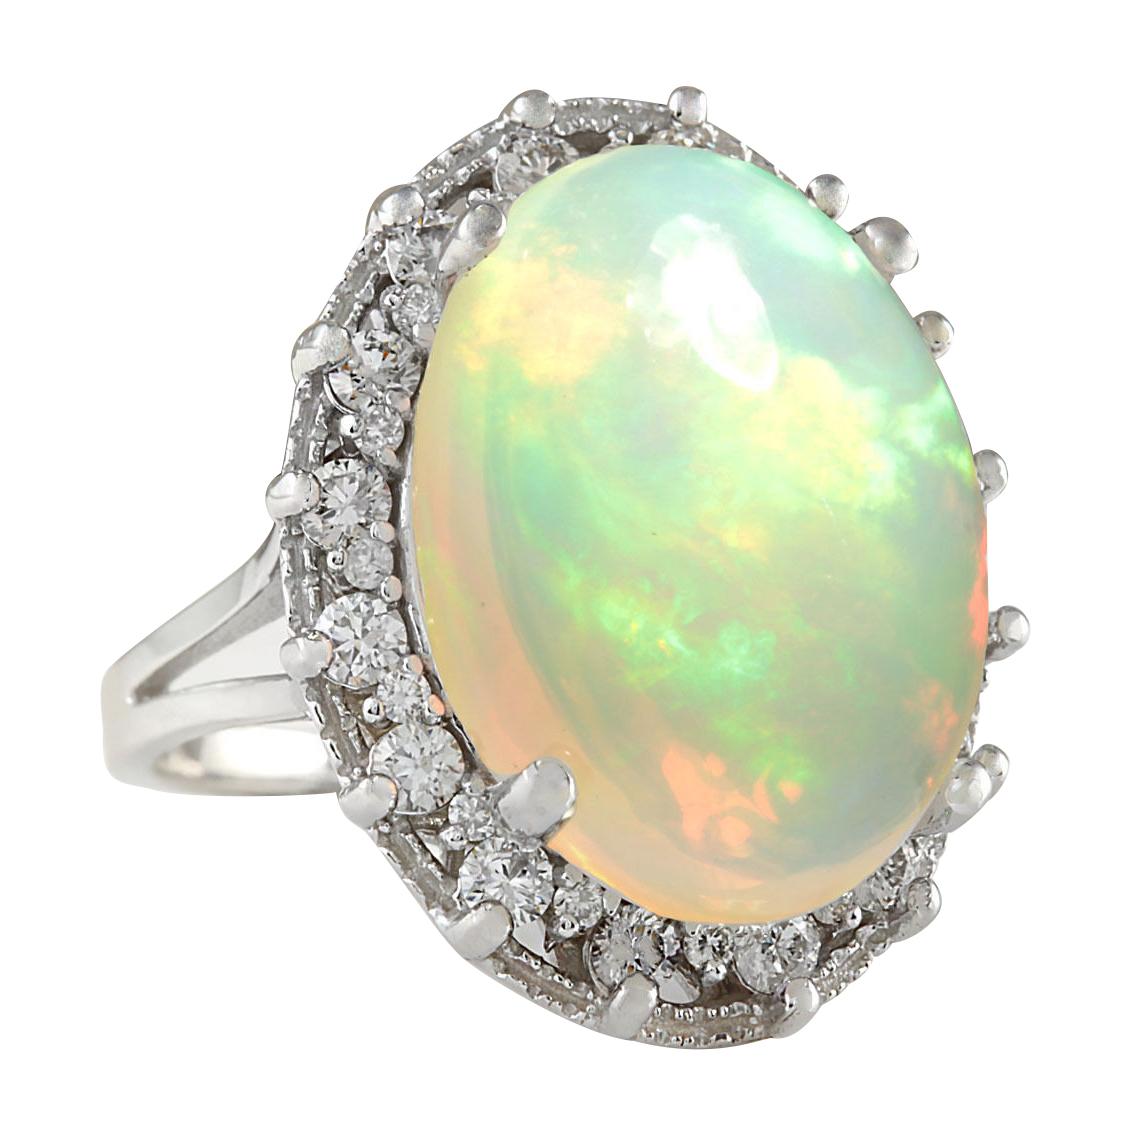 Stamped: 14K White Gold
Total Ring Weight: 8.0 Grams
Total Natural Opal Weight is 11.36 Carat (Measures: 20.00x15.00 mm)
Color: Multicolor
Total Natural Diamond Weight is 1.00 Carat
Color: F-G, Clarity: VS2-SI1
Face Measures: 24.50x19.50 mm
Sku: